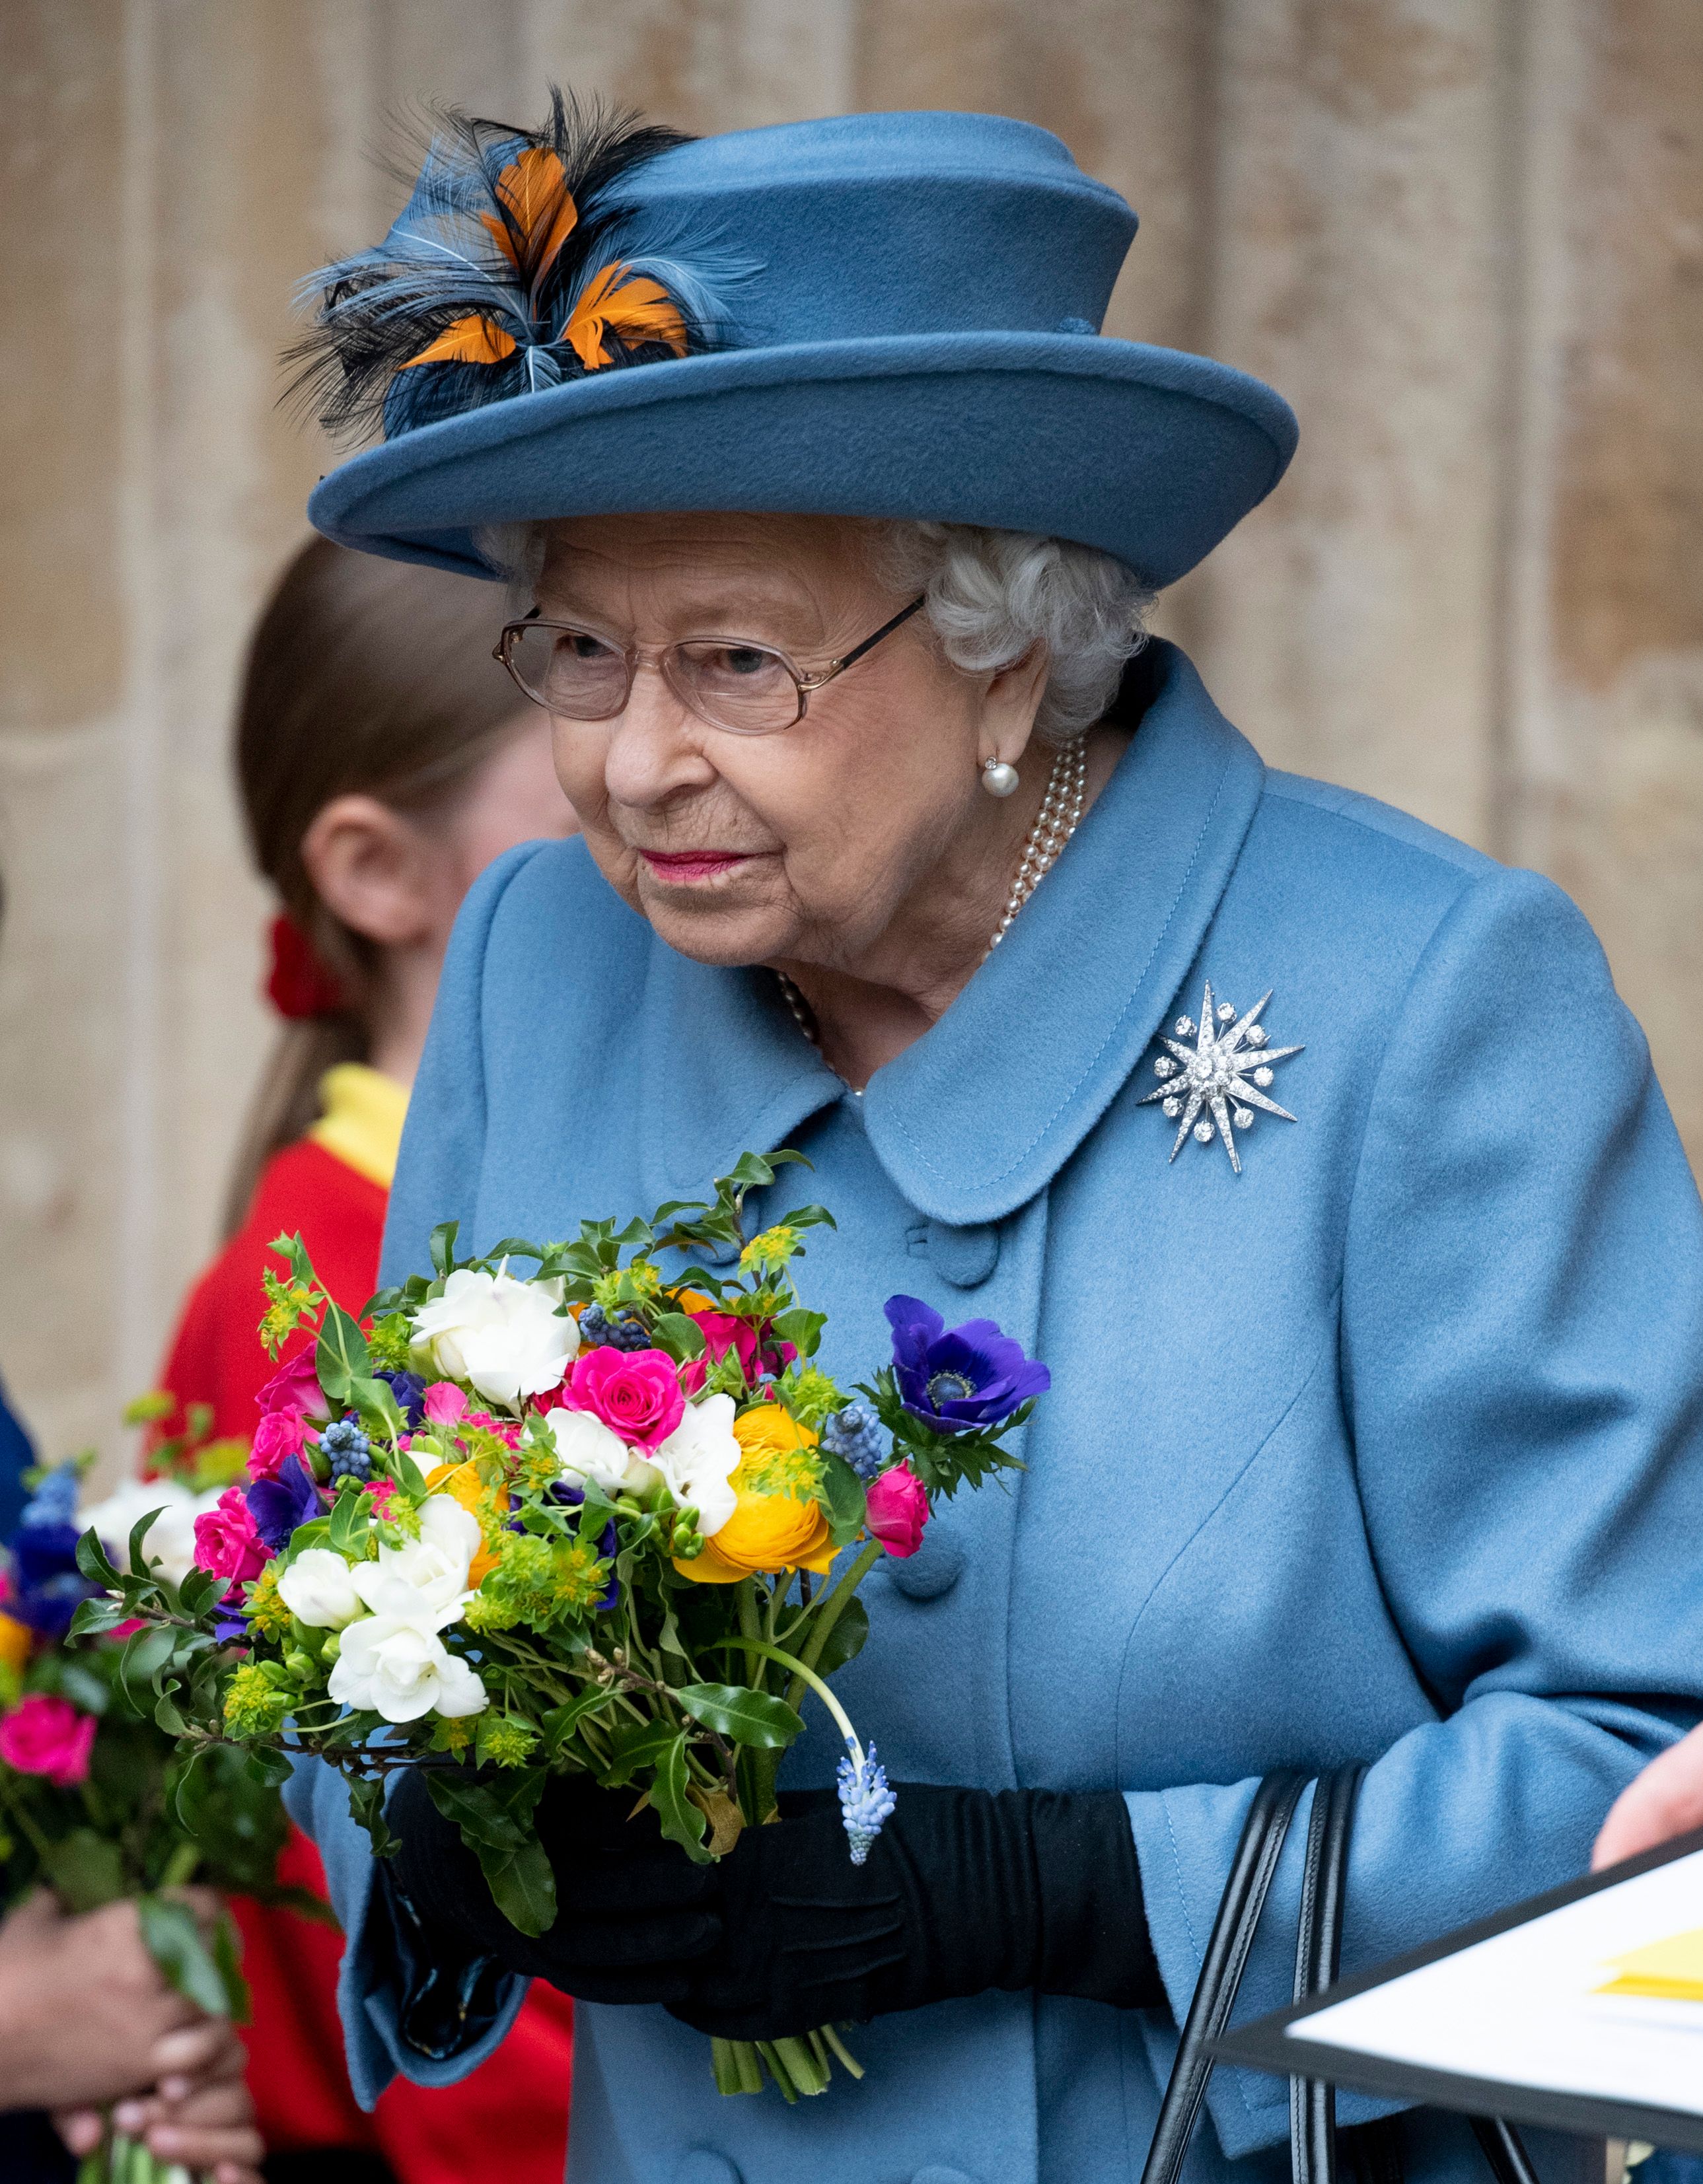 Queen Elizabeth II at the Commonwealth Day Service 2020 at Westminster Abbey on March 9, 2020 | Getty Images 